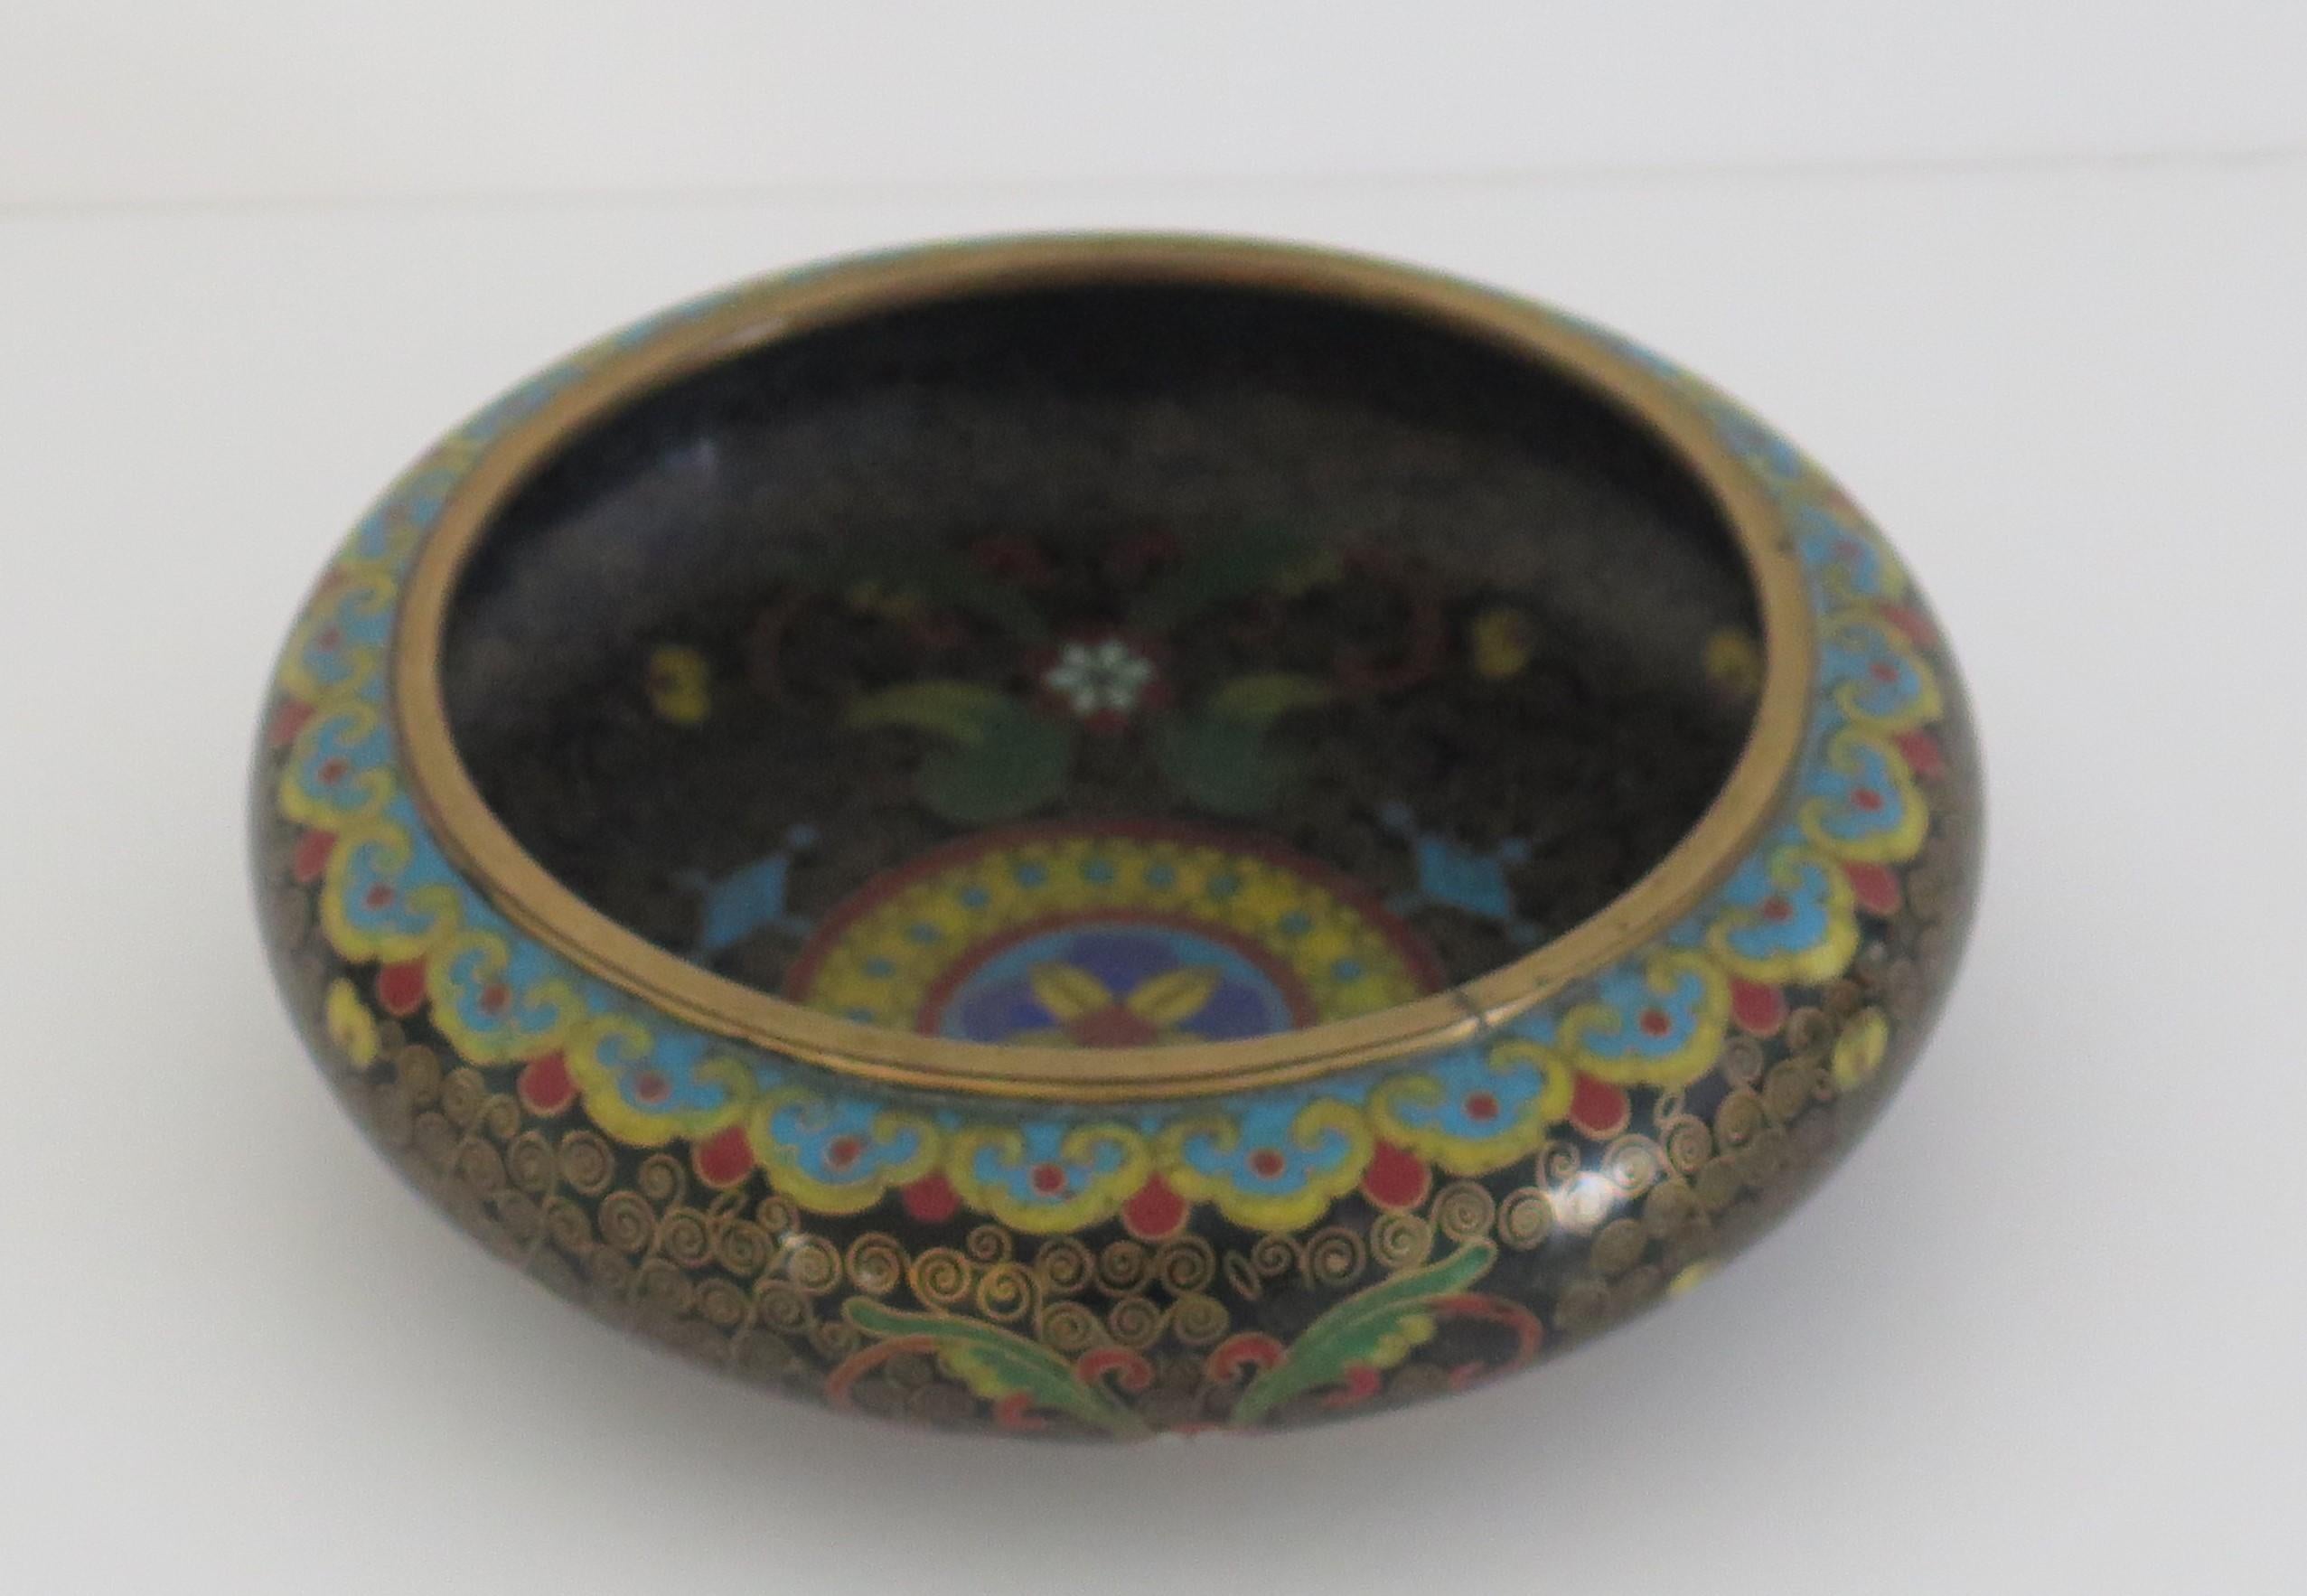 This is a good shallow cloisonne bowl made in China in the mid-19th century.

The bowl is circular with a short foot, beautifully made of bronze with rich, bold colorful enamels, intricate in its making and design.

The decoration shows stylized